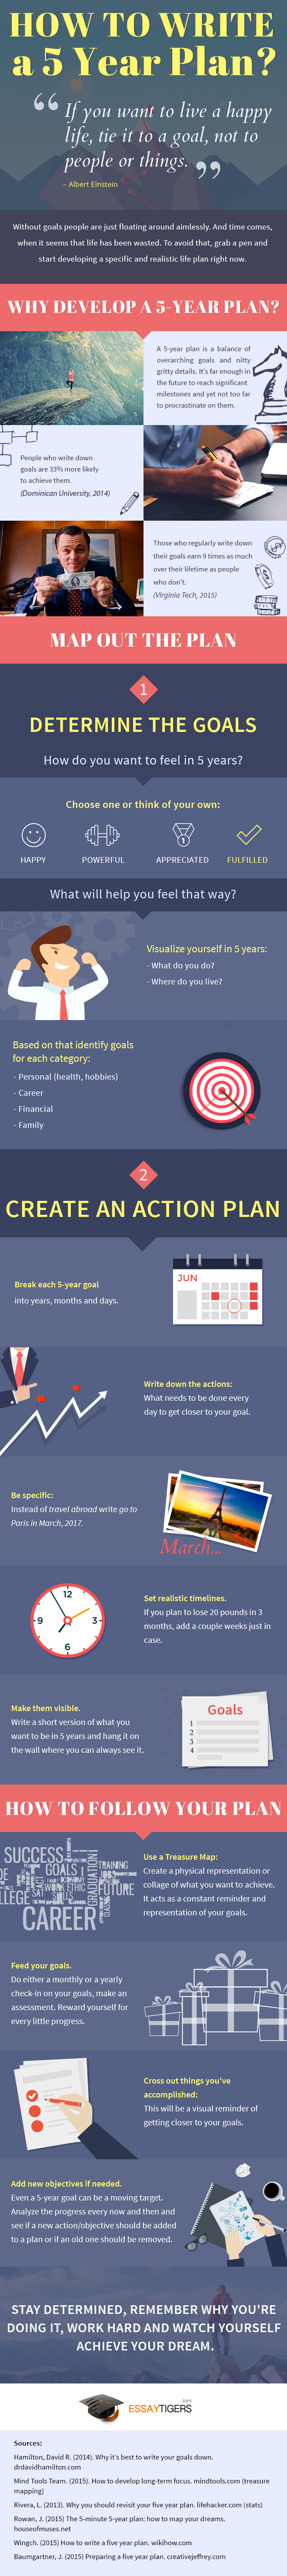 How to write a 5 year plan